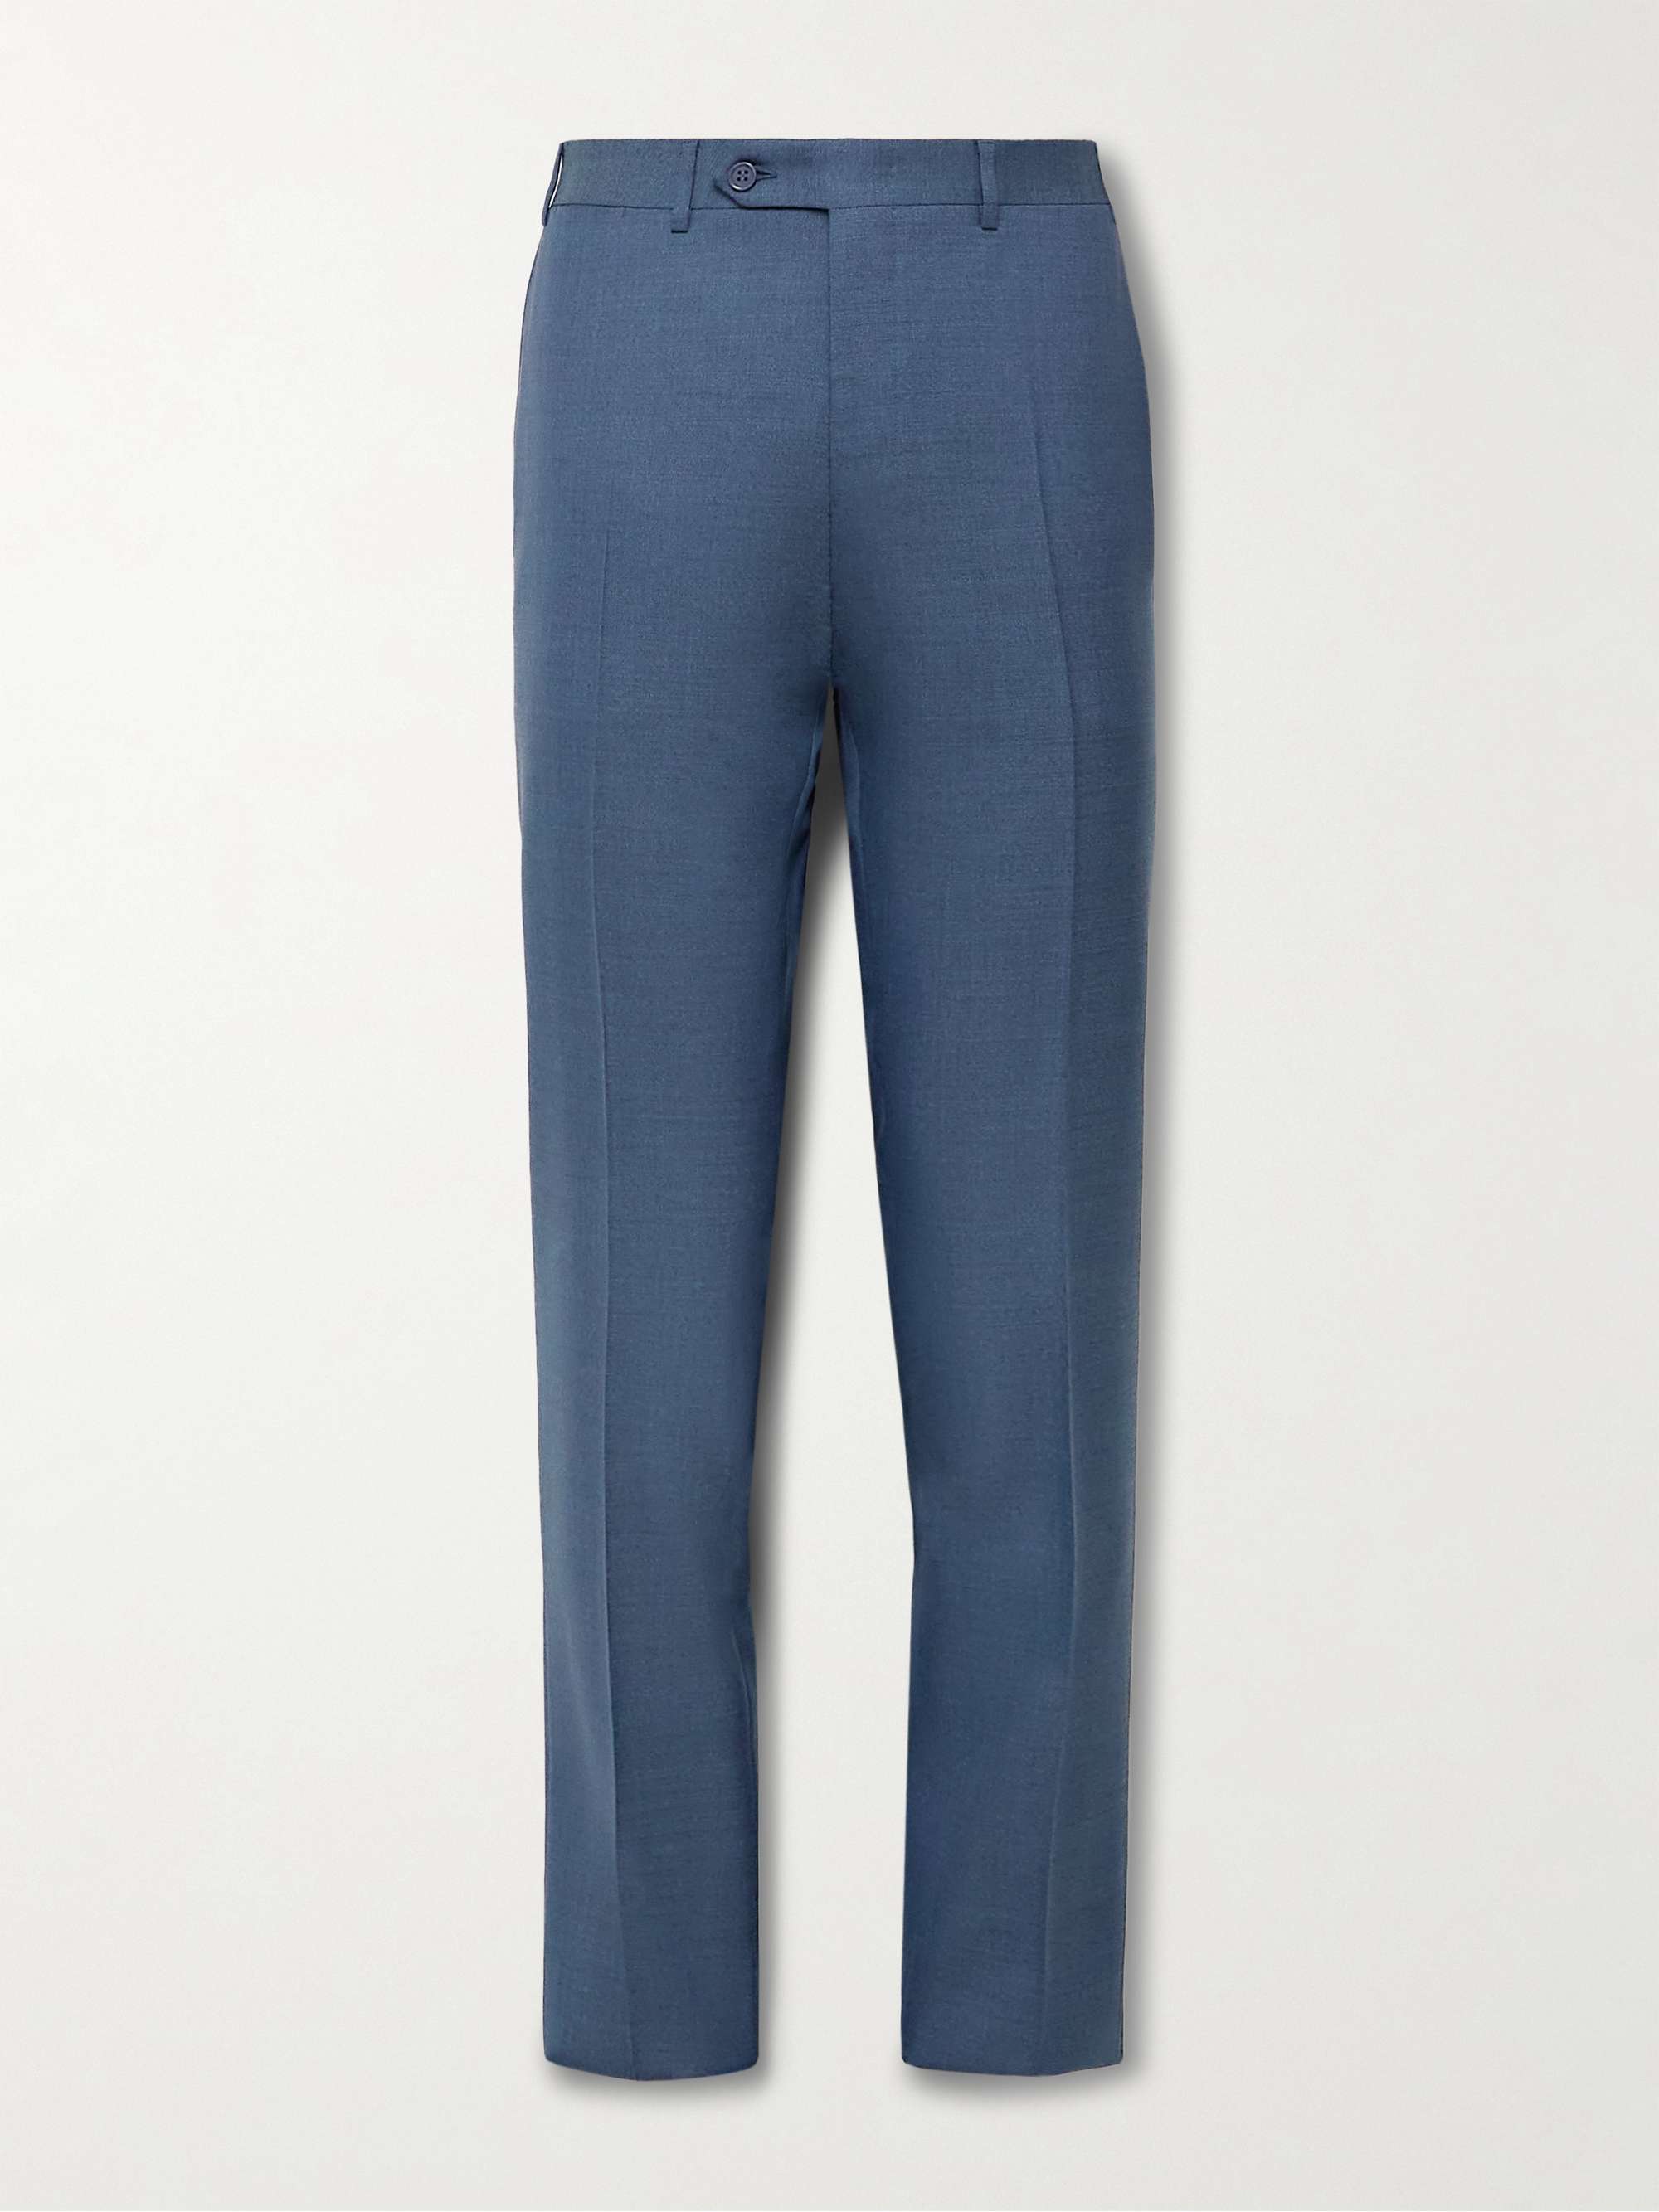 CANALI Slim-Fit Wool Suit Trousers